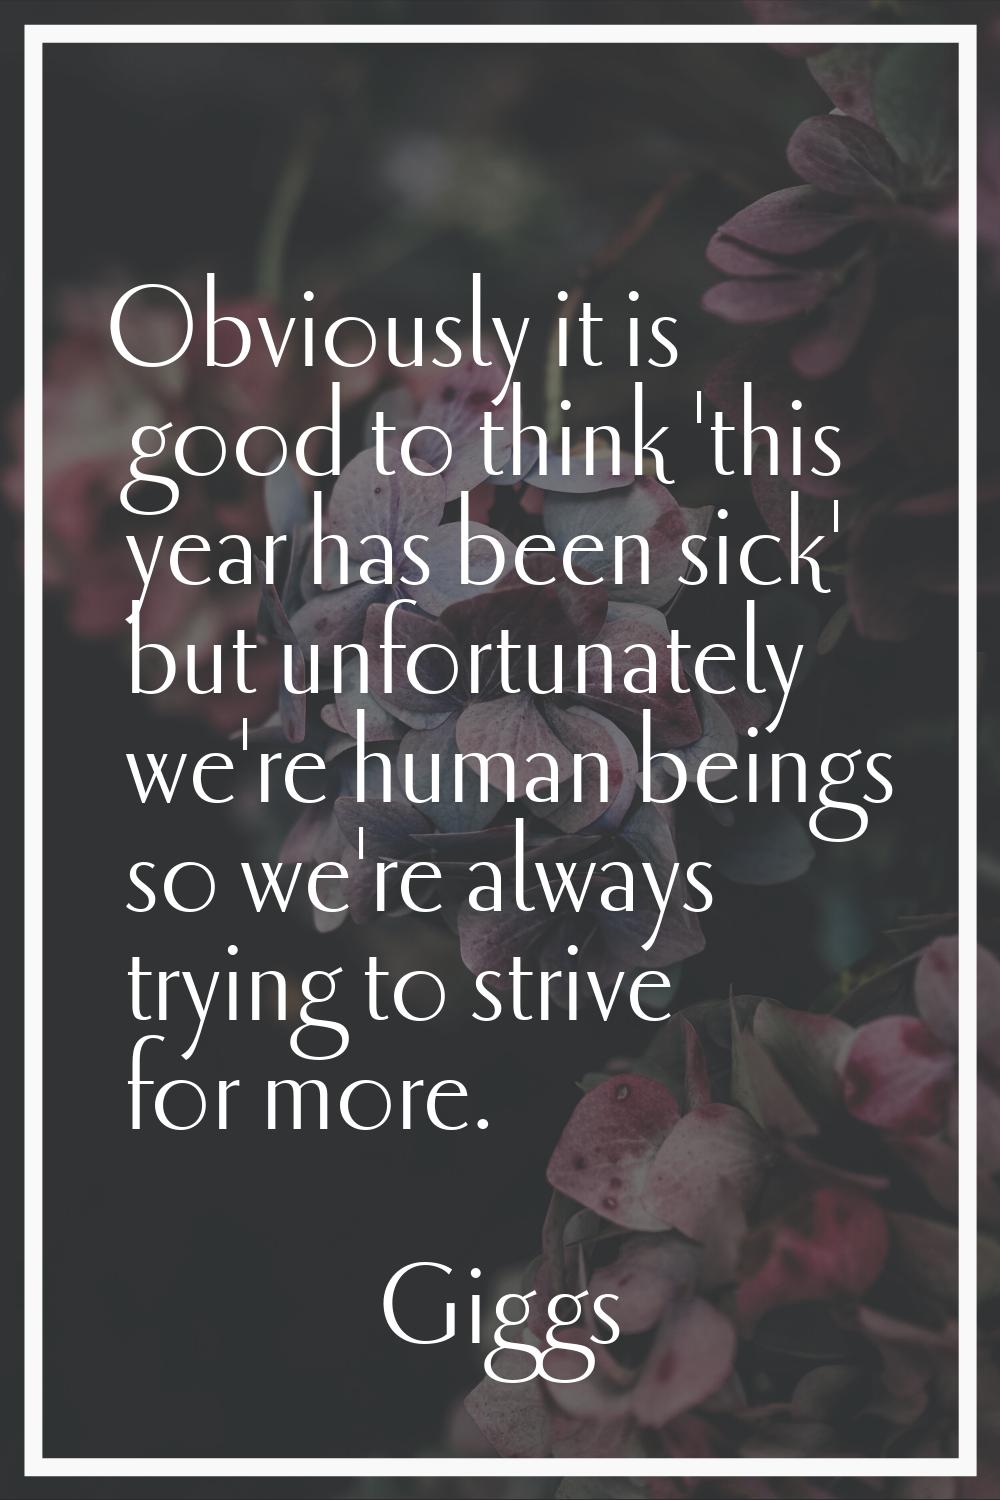 Obviously it is good to think 'this year has been sick' but unfortunately we're human beings so we'